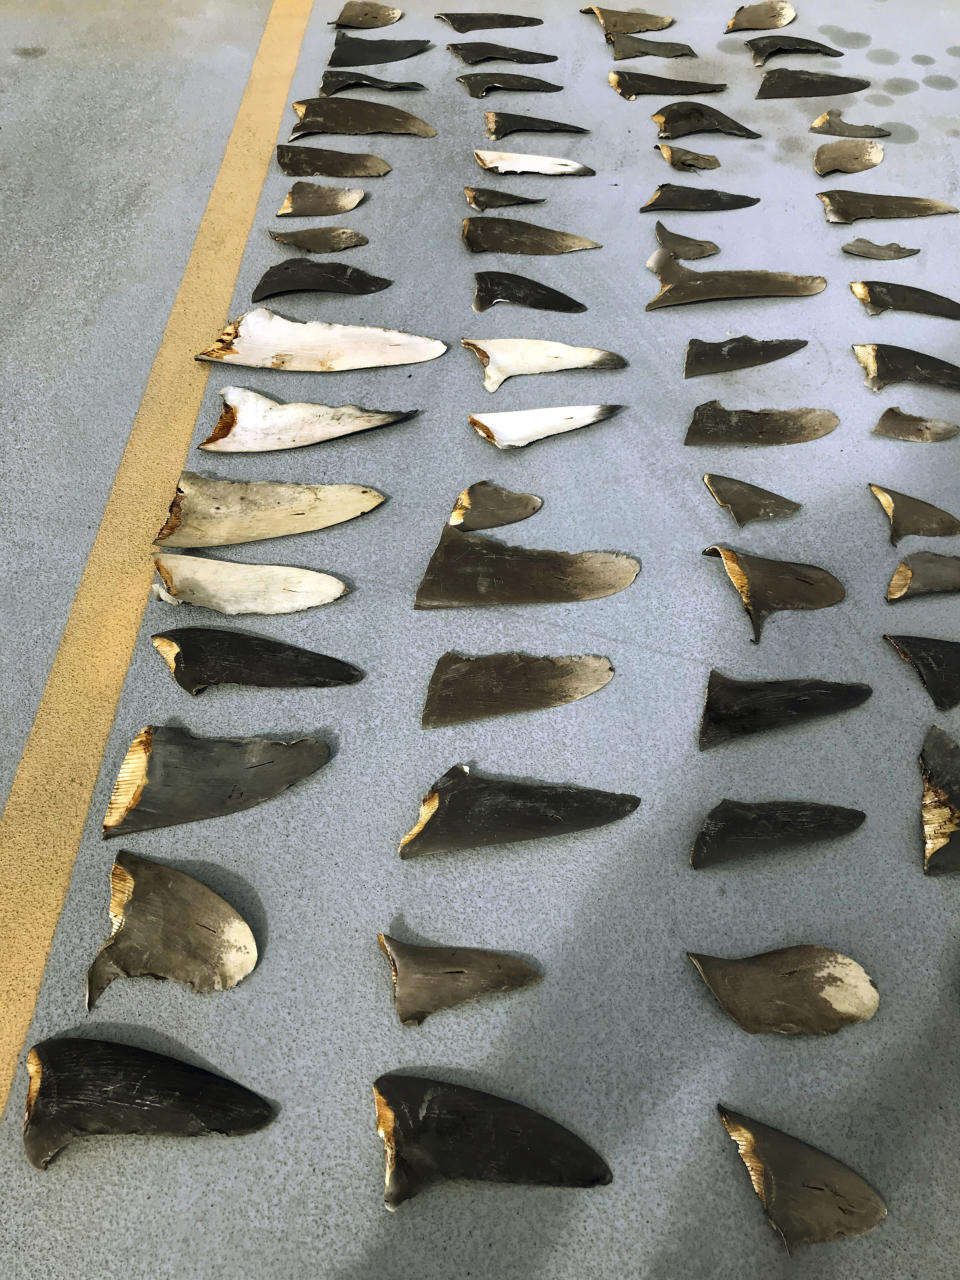 This Nov. 28, 2018 photo provided by the United States Attorney's Office and introduced as evidence in court in Honolulu shows some of the hundreds of shark fins seized from a Japanese fishing boat. U.S. prosecutors in Hawaii accuse the owner and officers of the Japanese fishing boat of helping Indonesian fishermen smuggle nearly 1,000 shark fins. Hamada Suisan Co. Ltd., the Japanese business that owned the vessel, and JF Zengyoren, a Japanese fishing cooperative, were charged on Dec. 11, 2018, with aiding and abetting the trafficking and smuggling of shark fins. (U.S. Attorney's Office via AP)